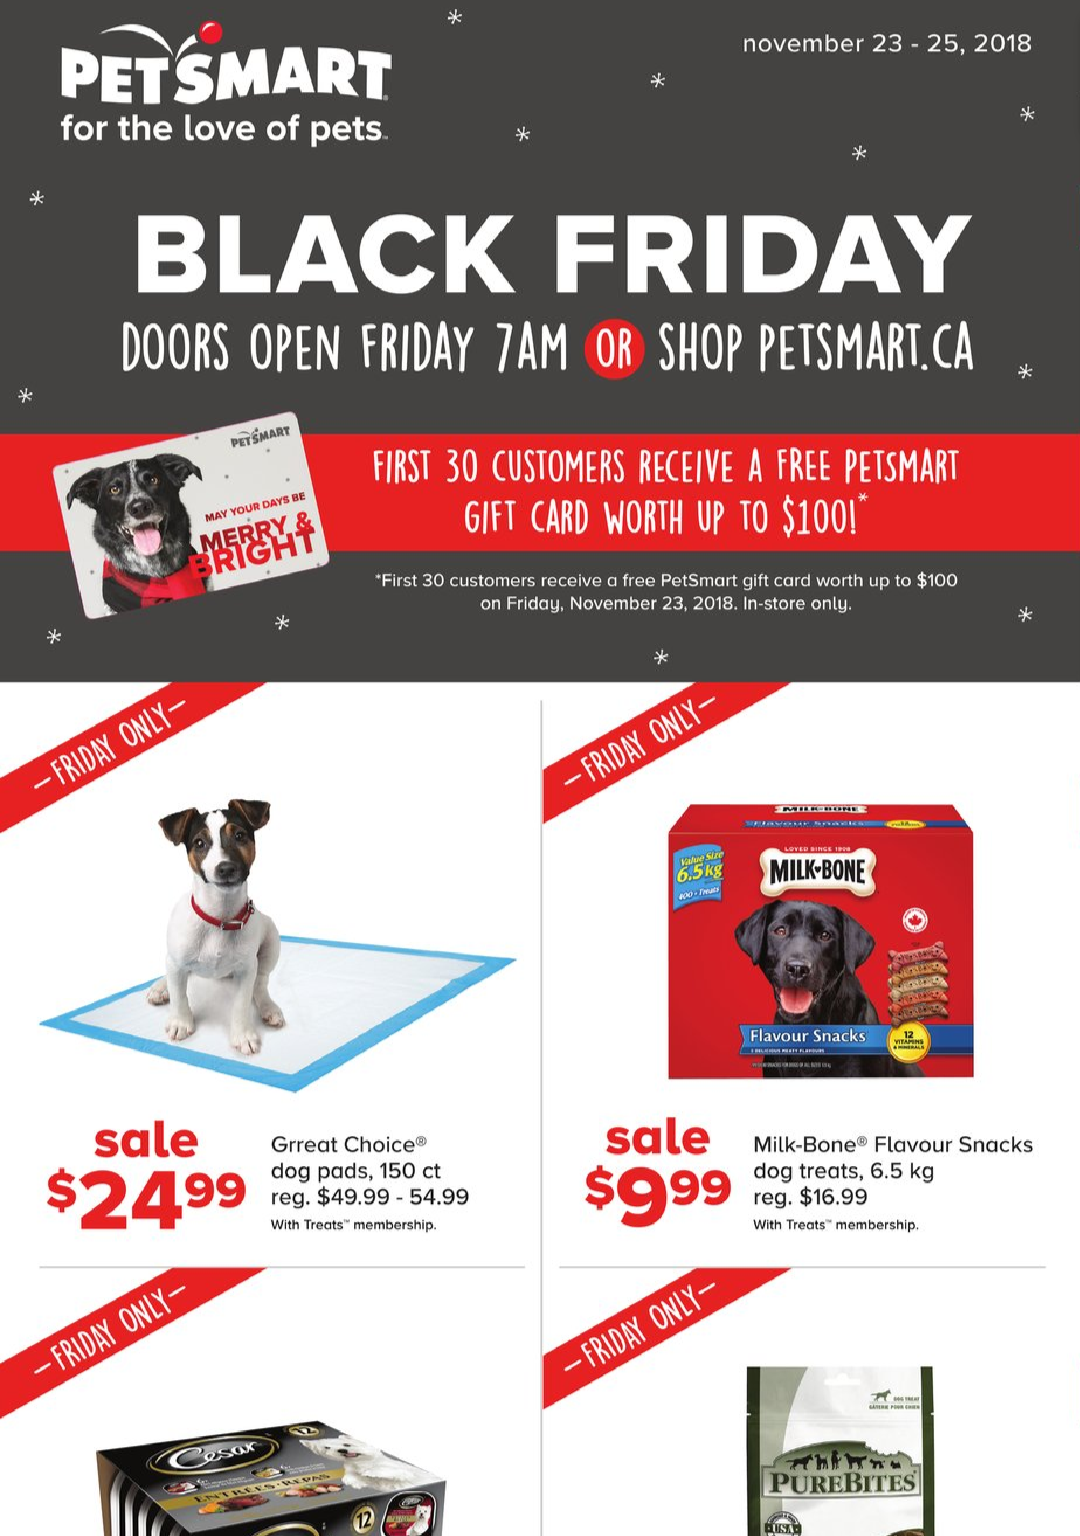 Pet Smart Black Friday Flyer Consider going to shop for a pet rescue